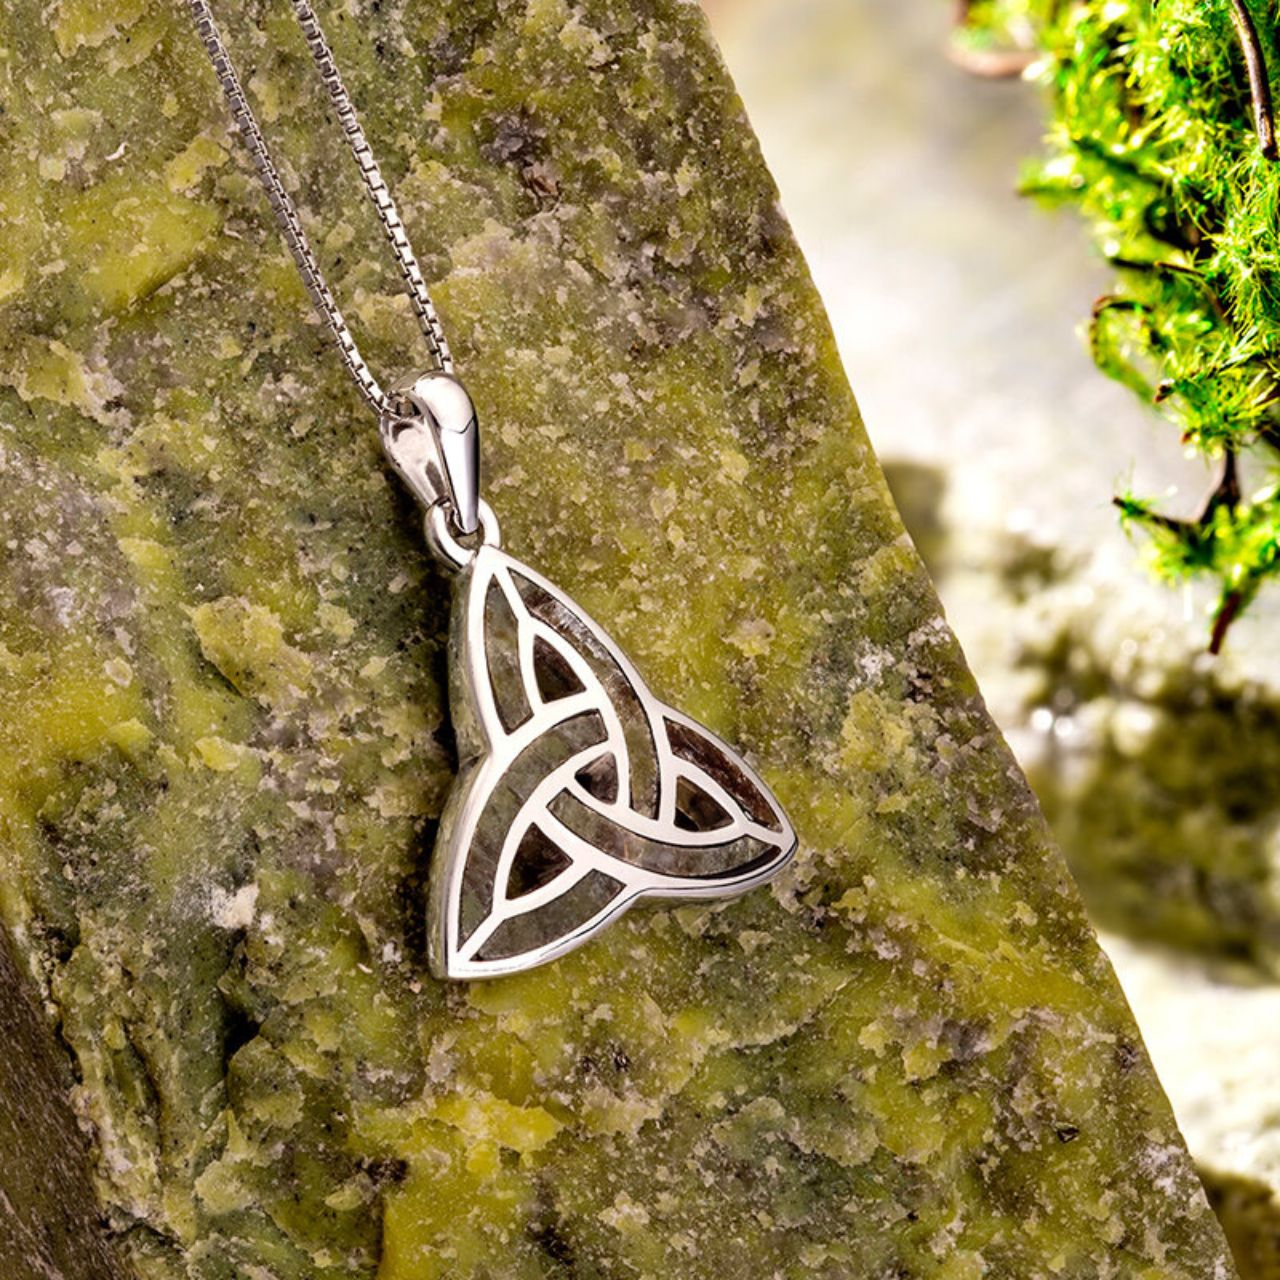 Sterling Silver Connemara Marble Trinity Knot Pendant  The Trinity symbol signifies eternal life and never-ending love, with no beginning and no end. Our expert designers have created this pendant in sterling silver featuring Connemara marble, a unique stone that dates back over 900 million years and is known as “Ireland’s gemstone”.